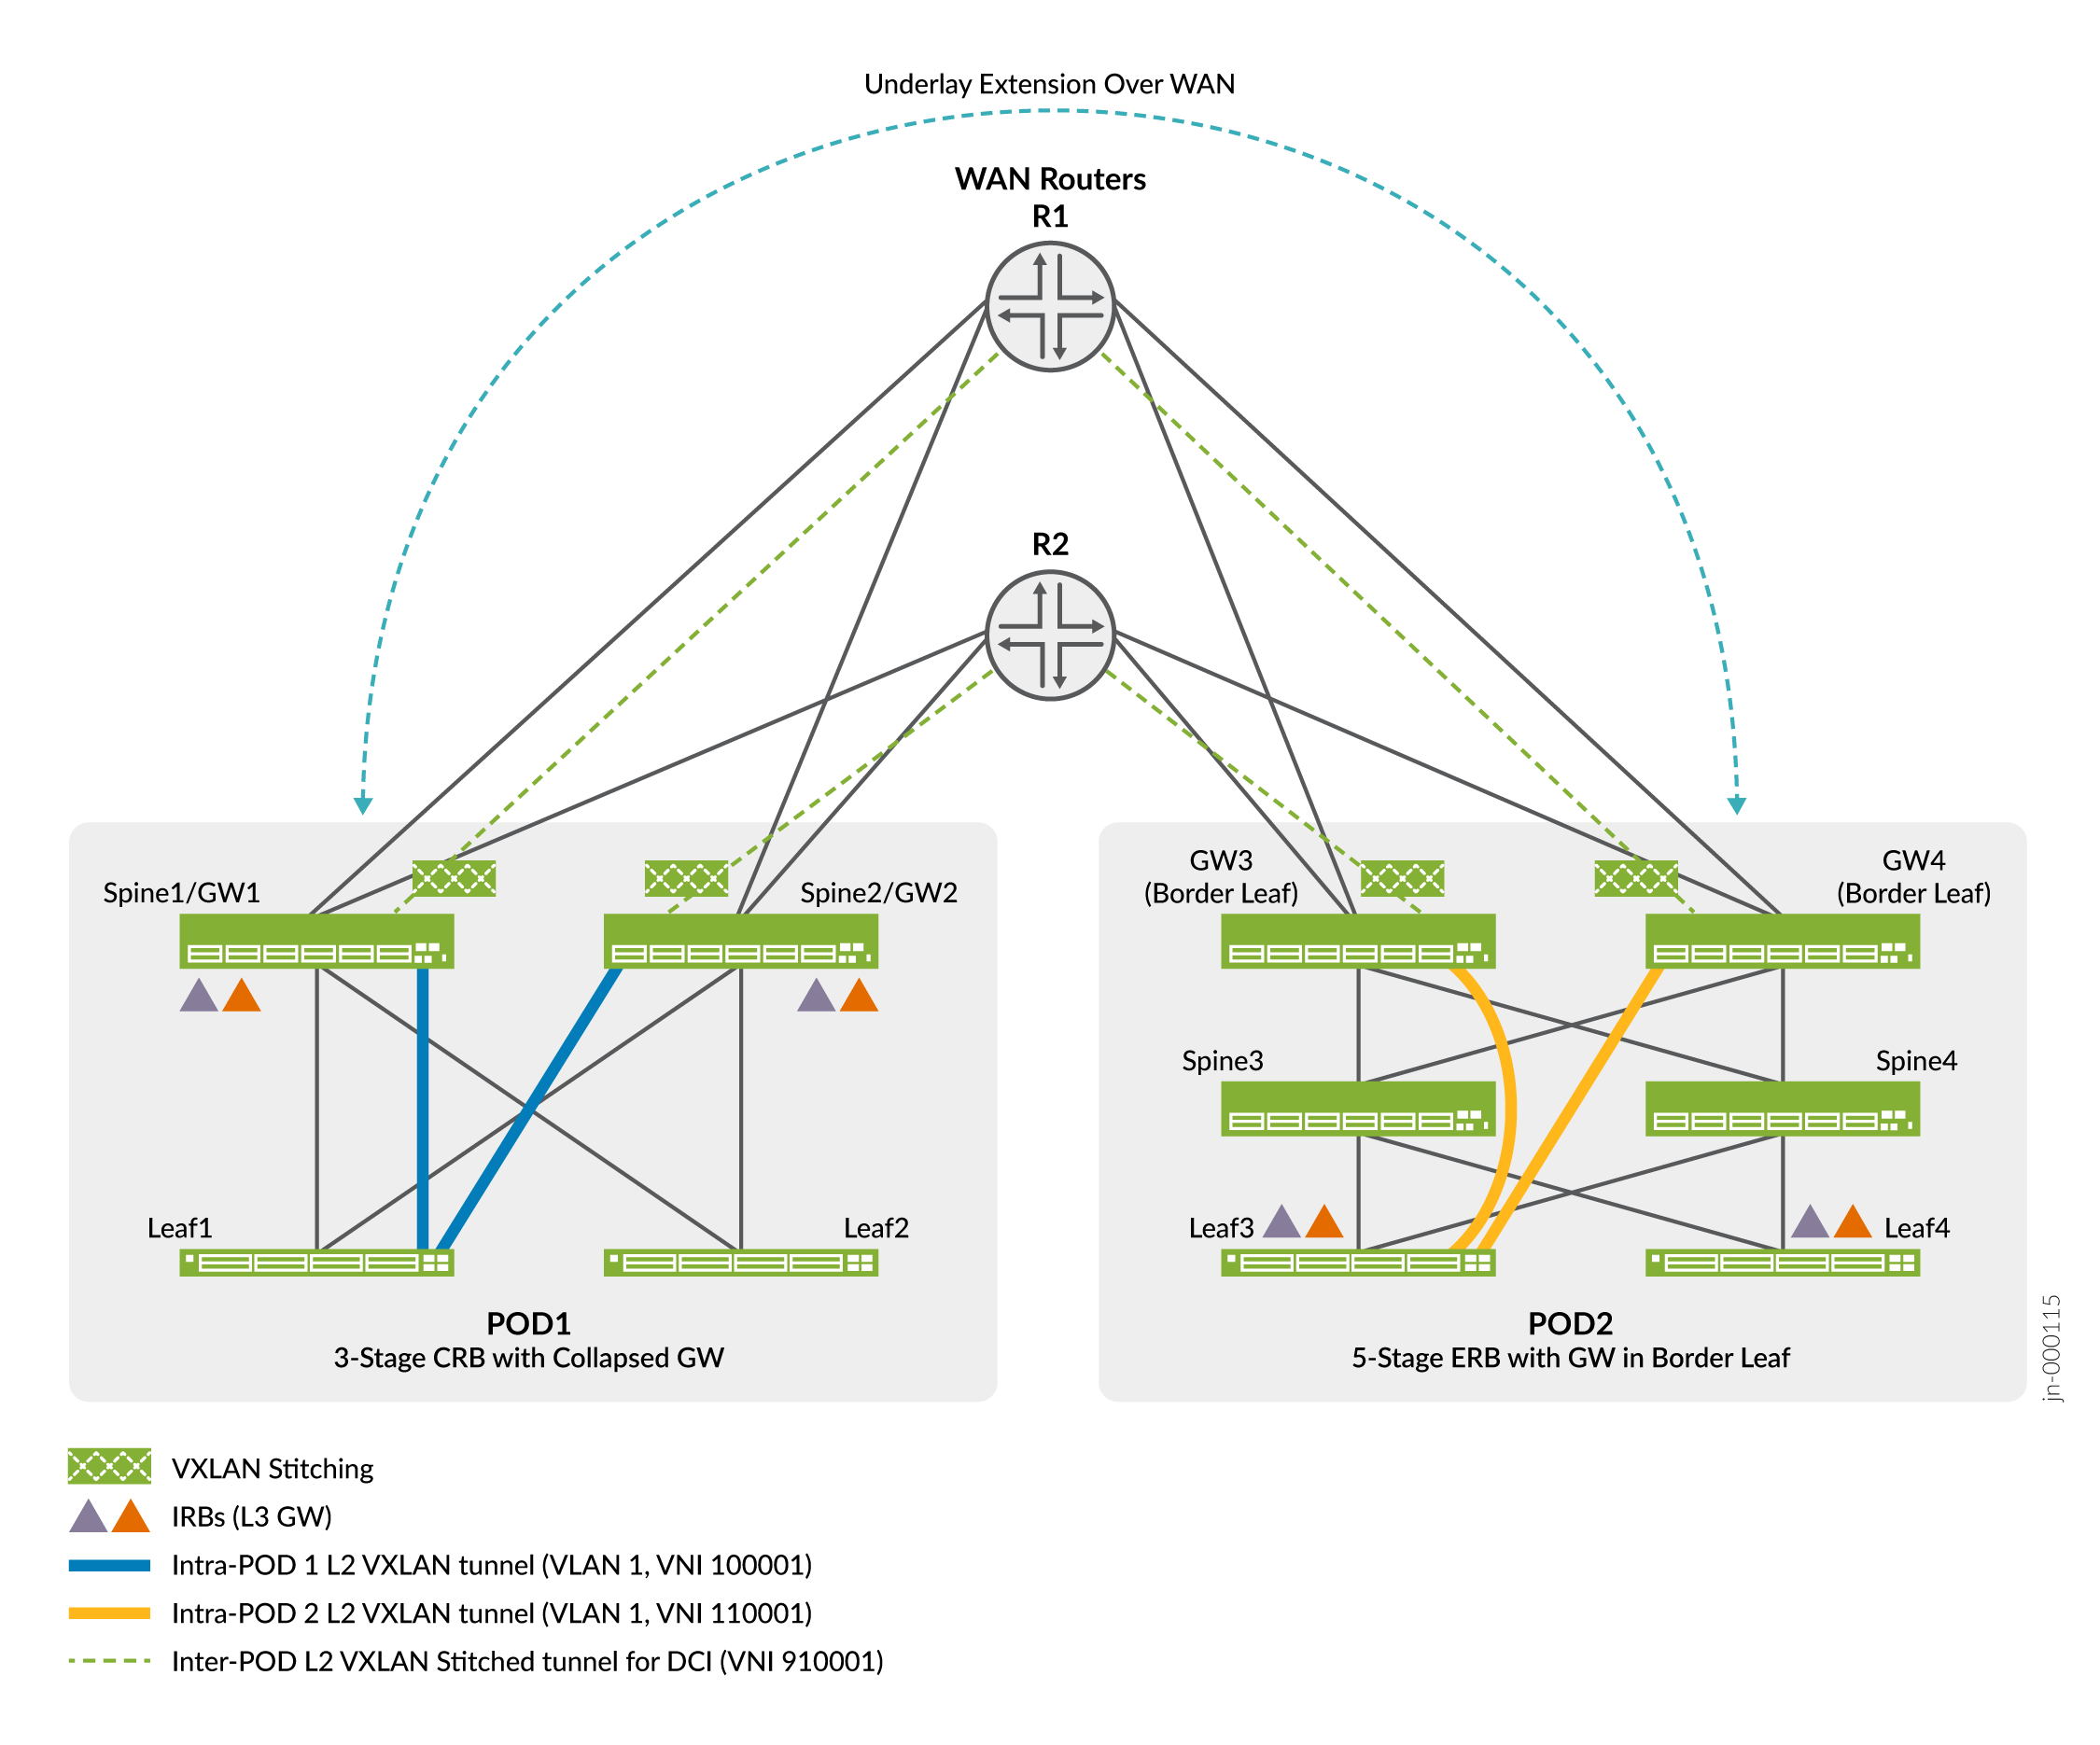 VXLAN Stitching Reference Architectures